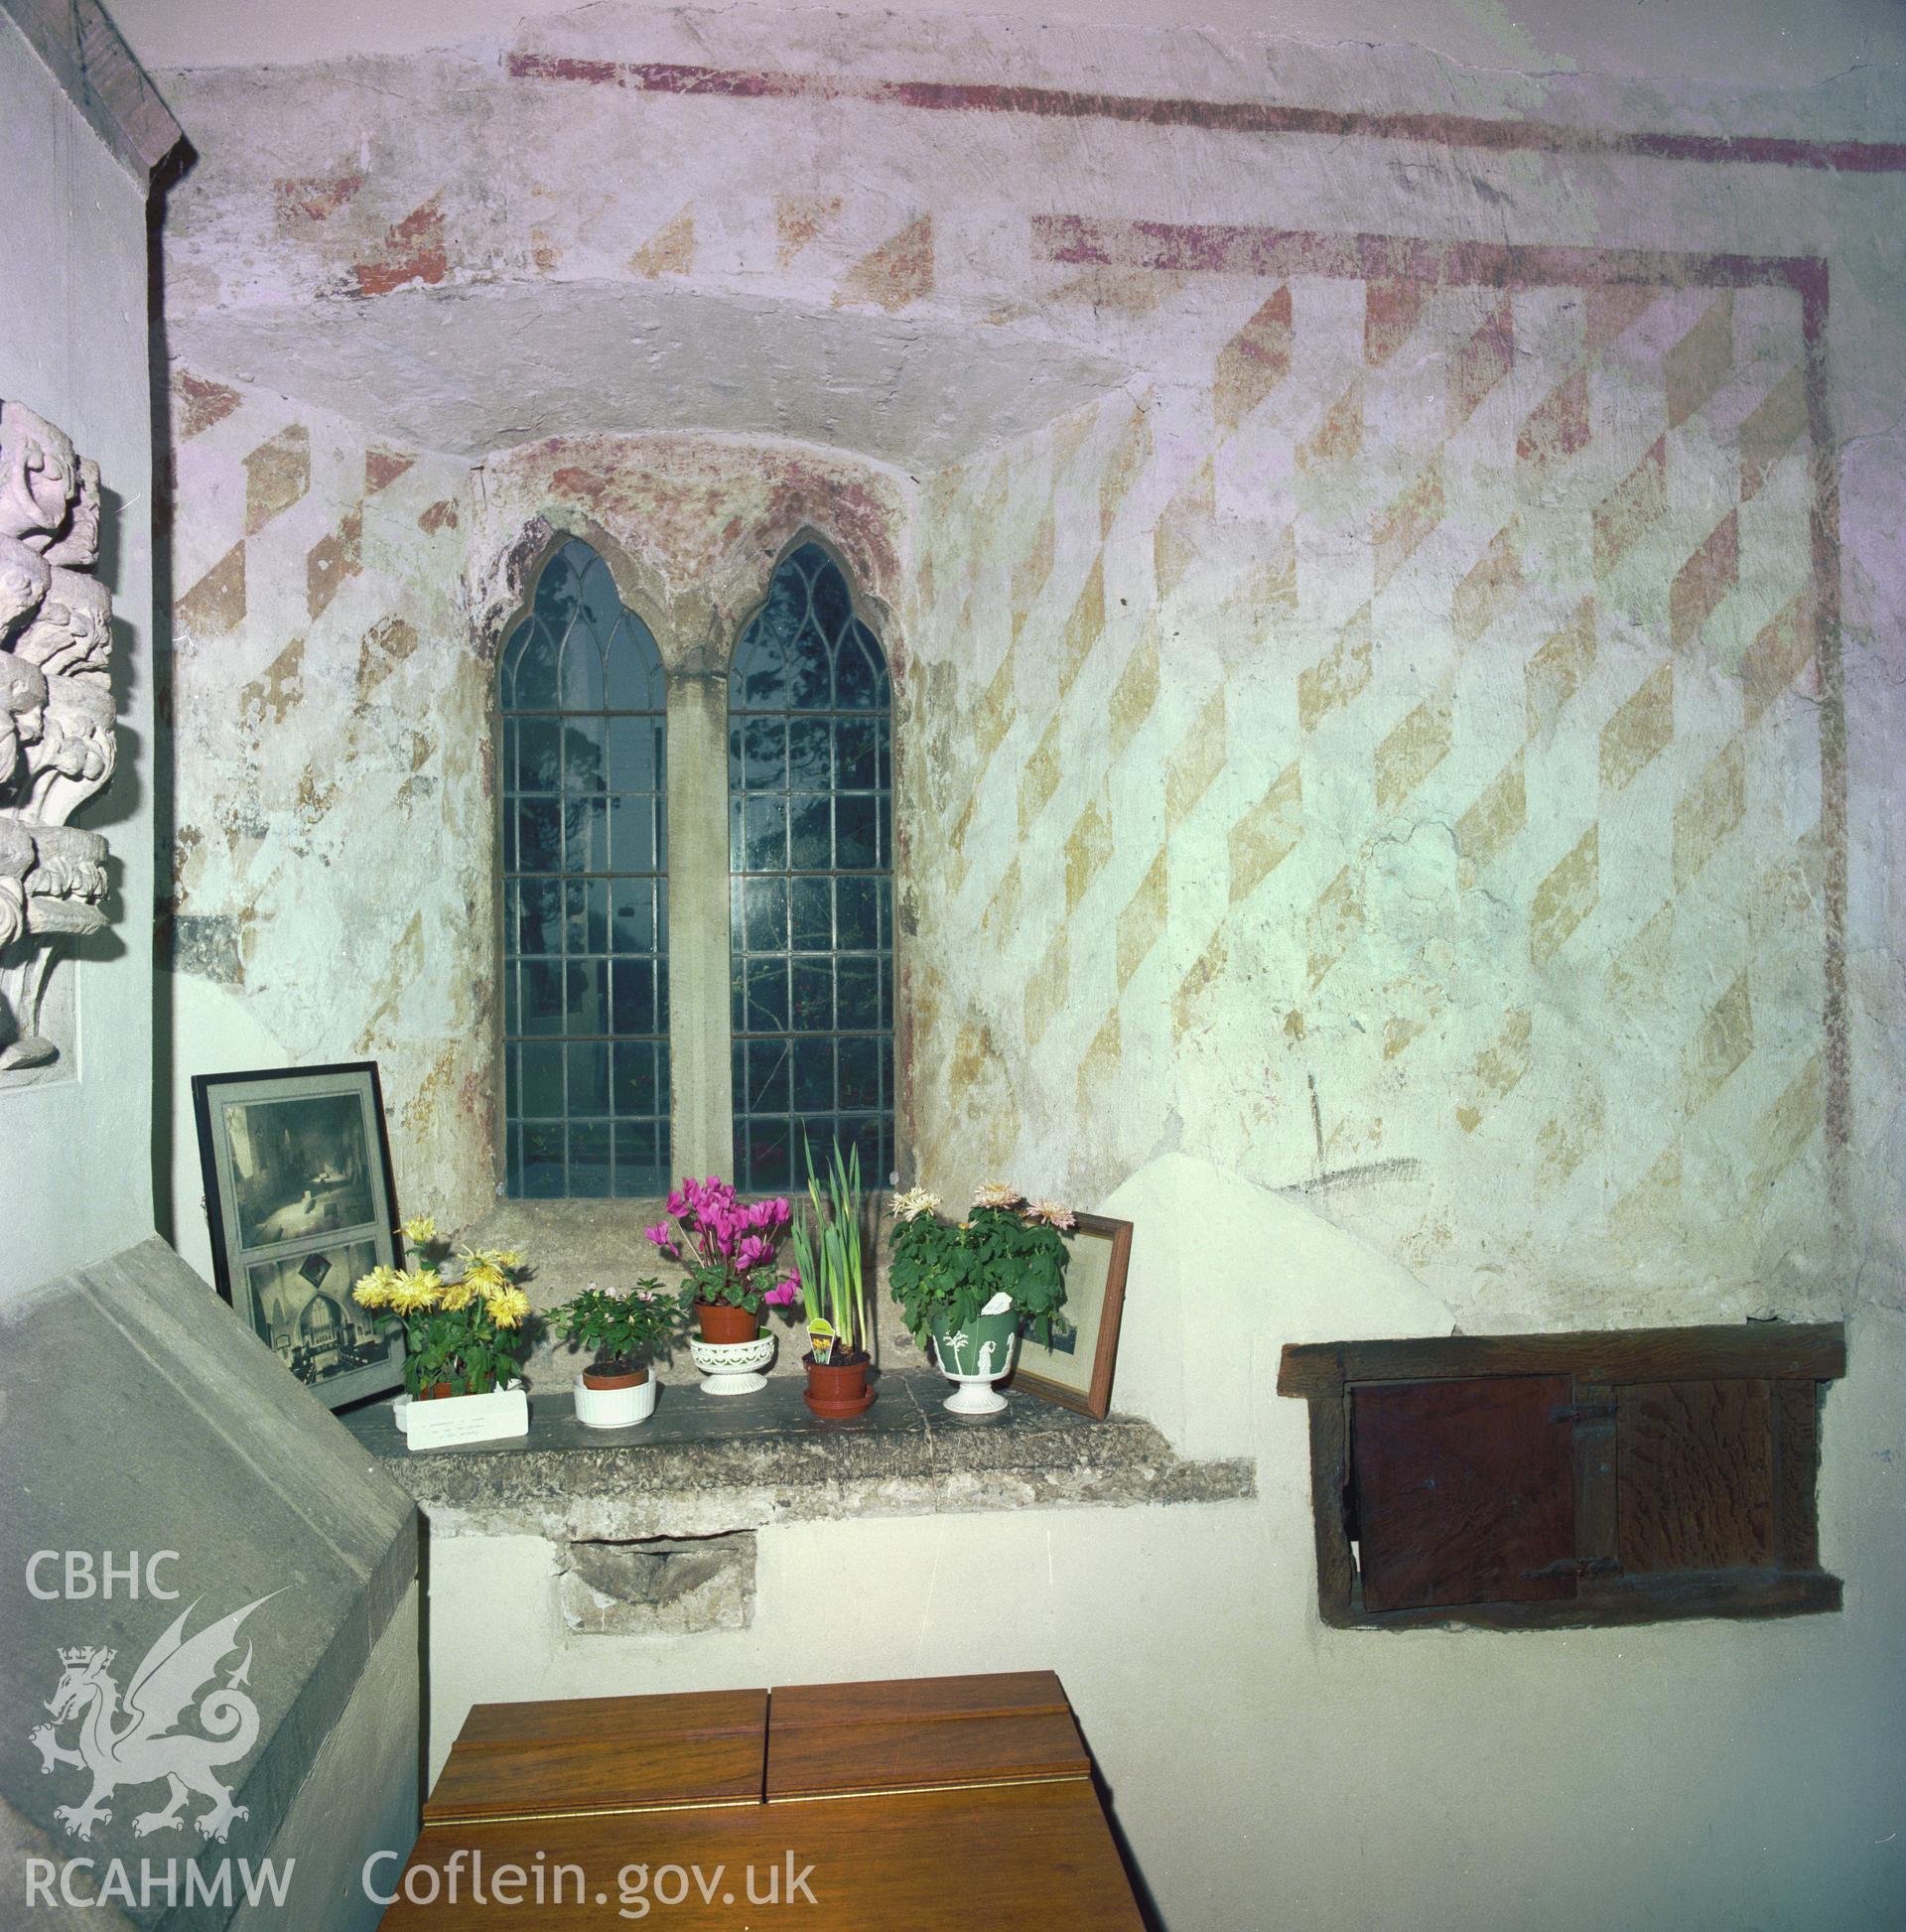 RCAHMW colour transparency showing wallpainting at St Illtyds Church, Llantwit Major, taken by Iain Wright, 2003